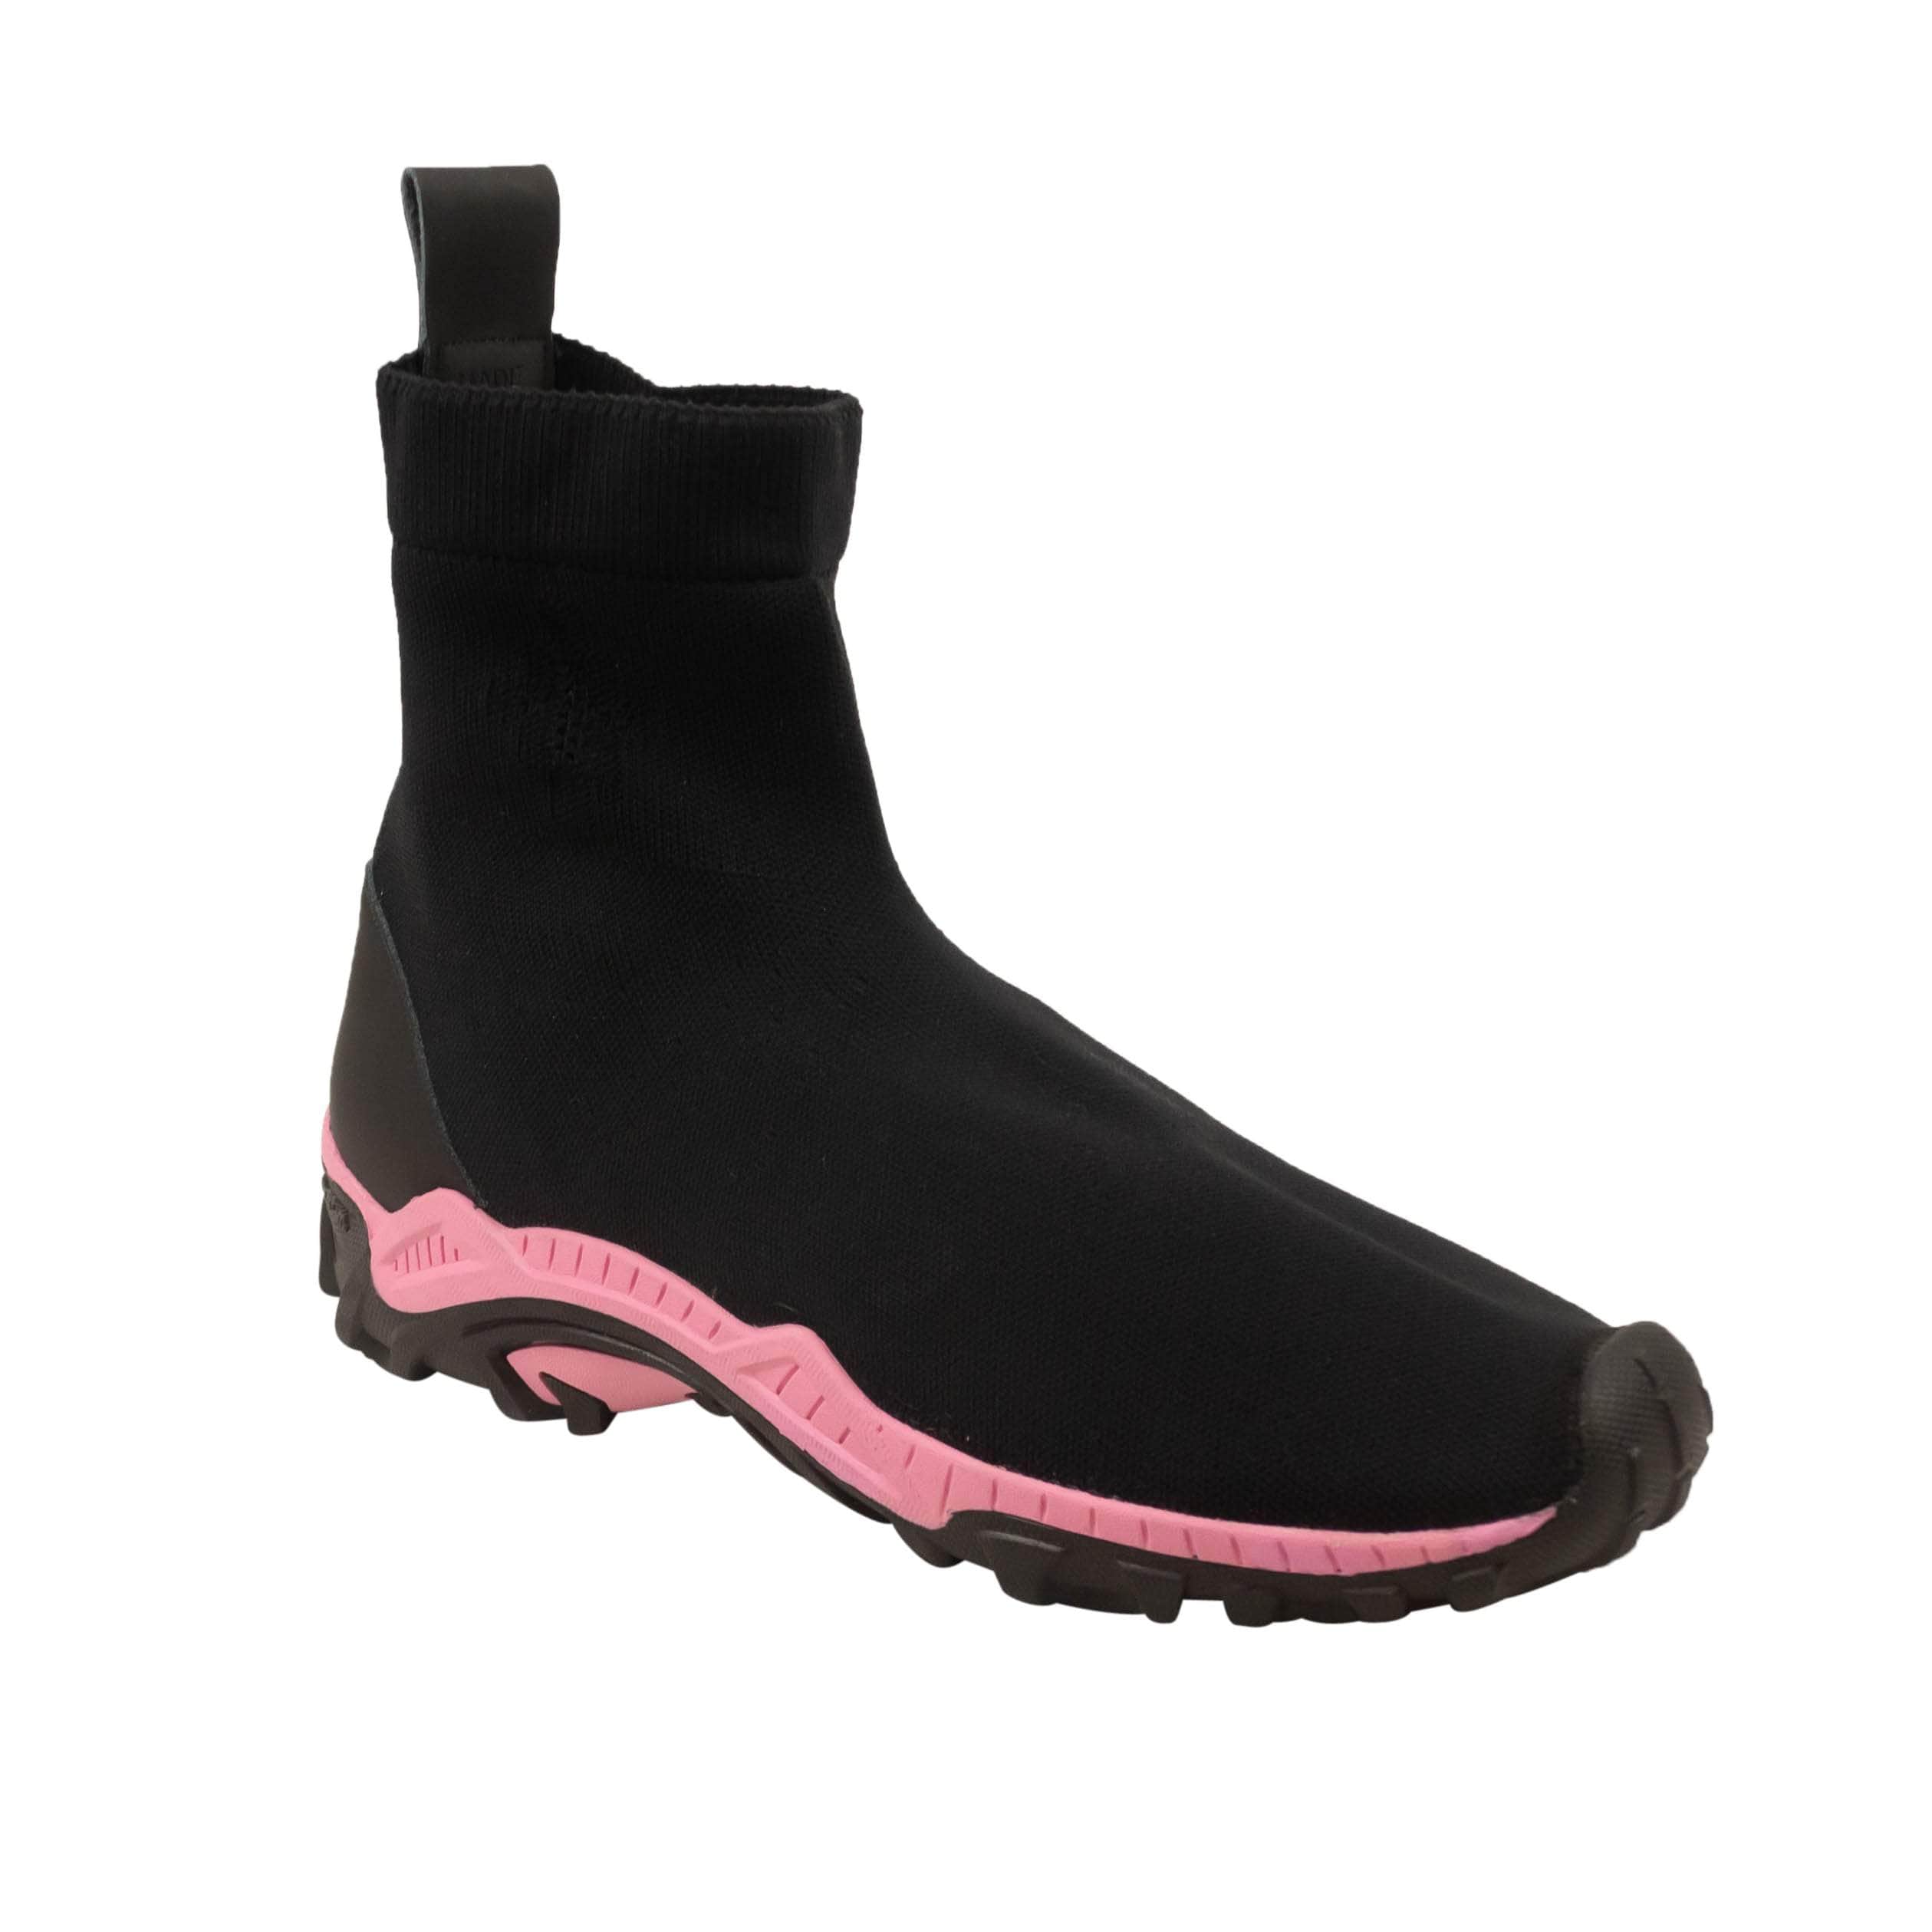 Marcelo Burlon 250-500, channelenable-all, chicmi, couponcollection, gender-mens, main-shoes, marcelo-burlon, mens-ankle-boots, mens-shoes, size-44 44 Black And Pink Flyknit Boots 95-MCB-2004/44 95-MCB-2004/44